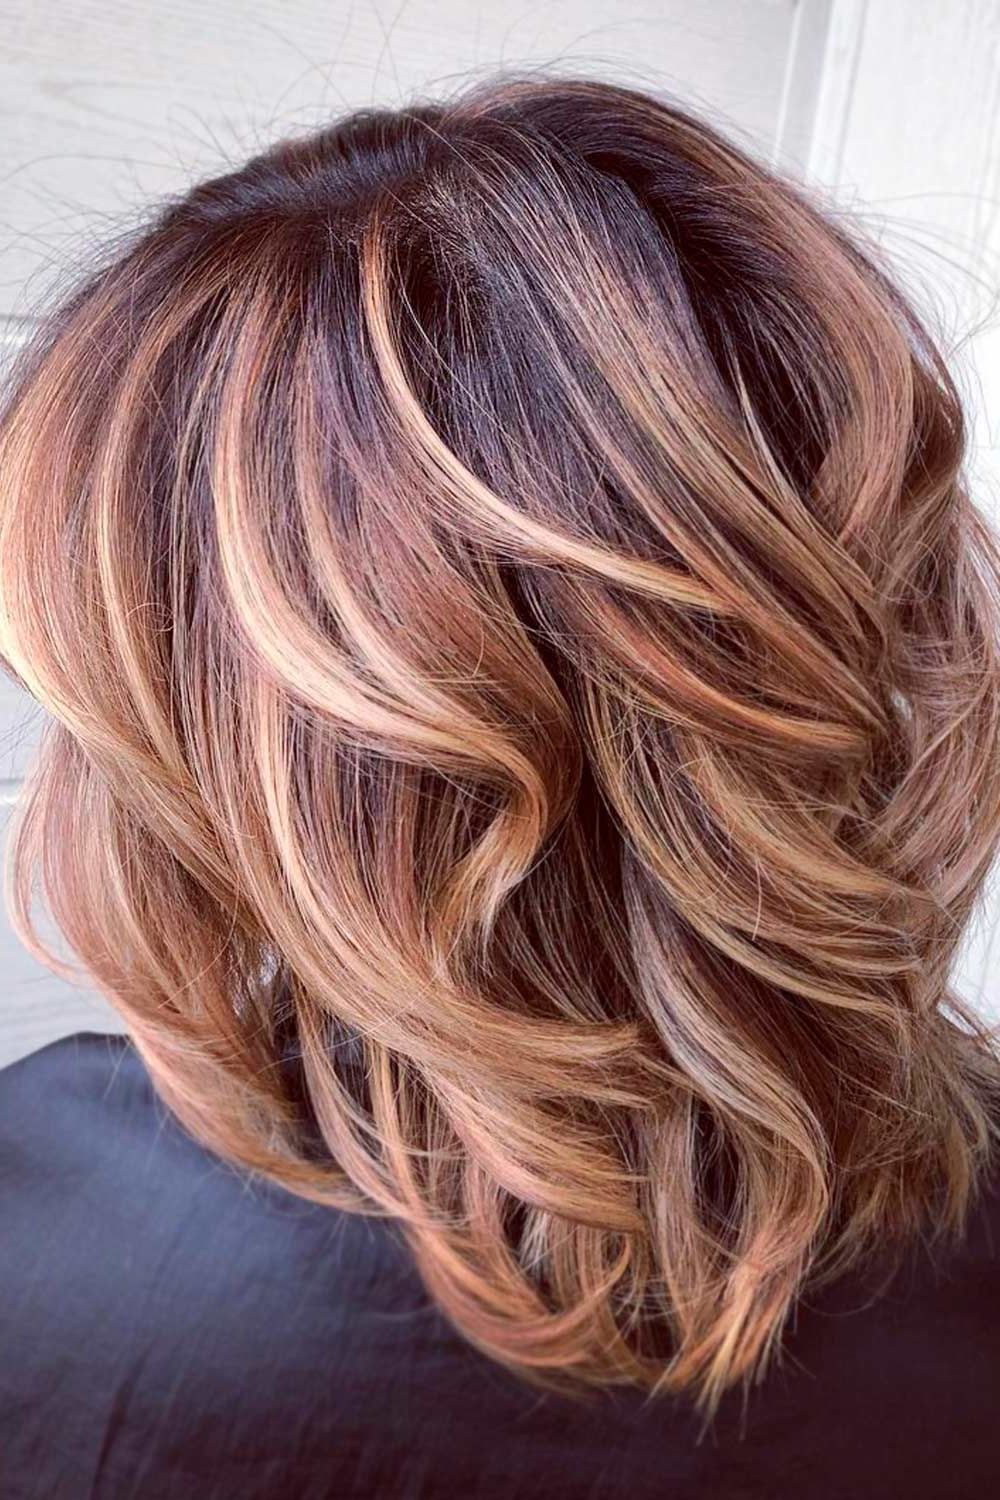 Untraditional Lob Haircut Ideas To Give A Try (View 6 of 20)